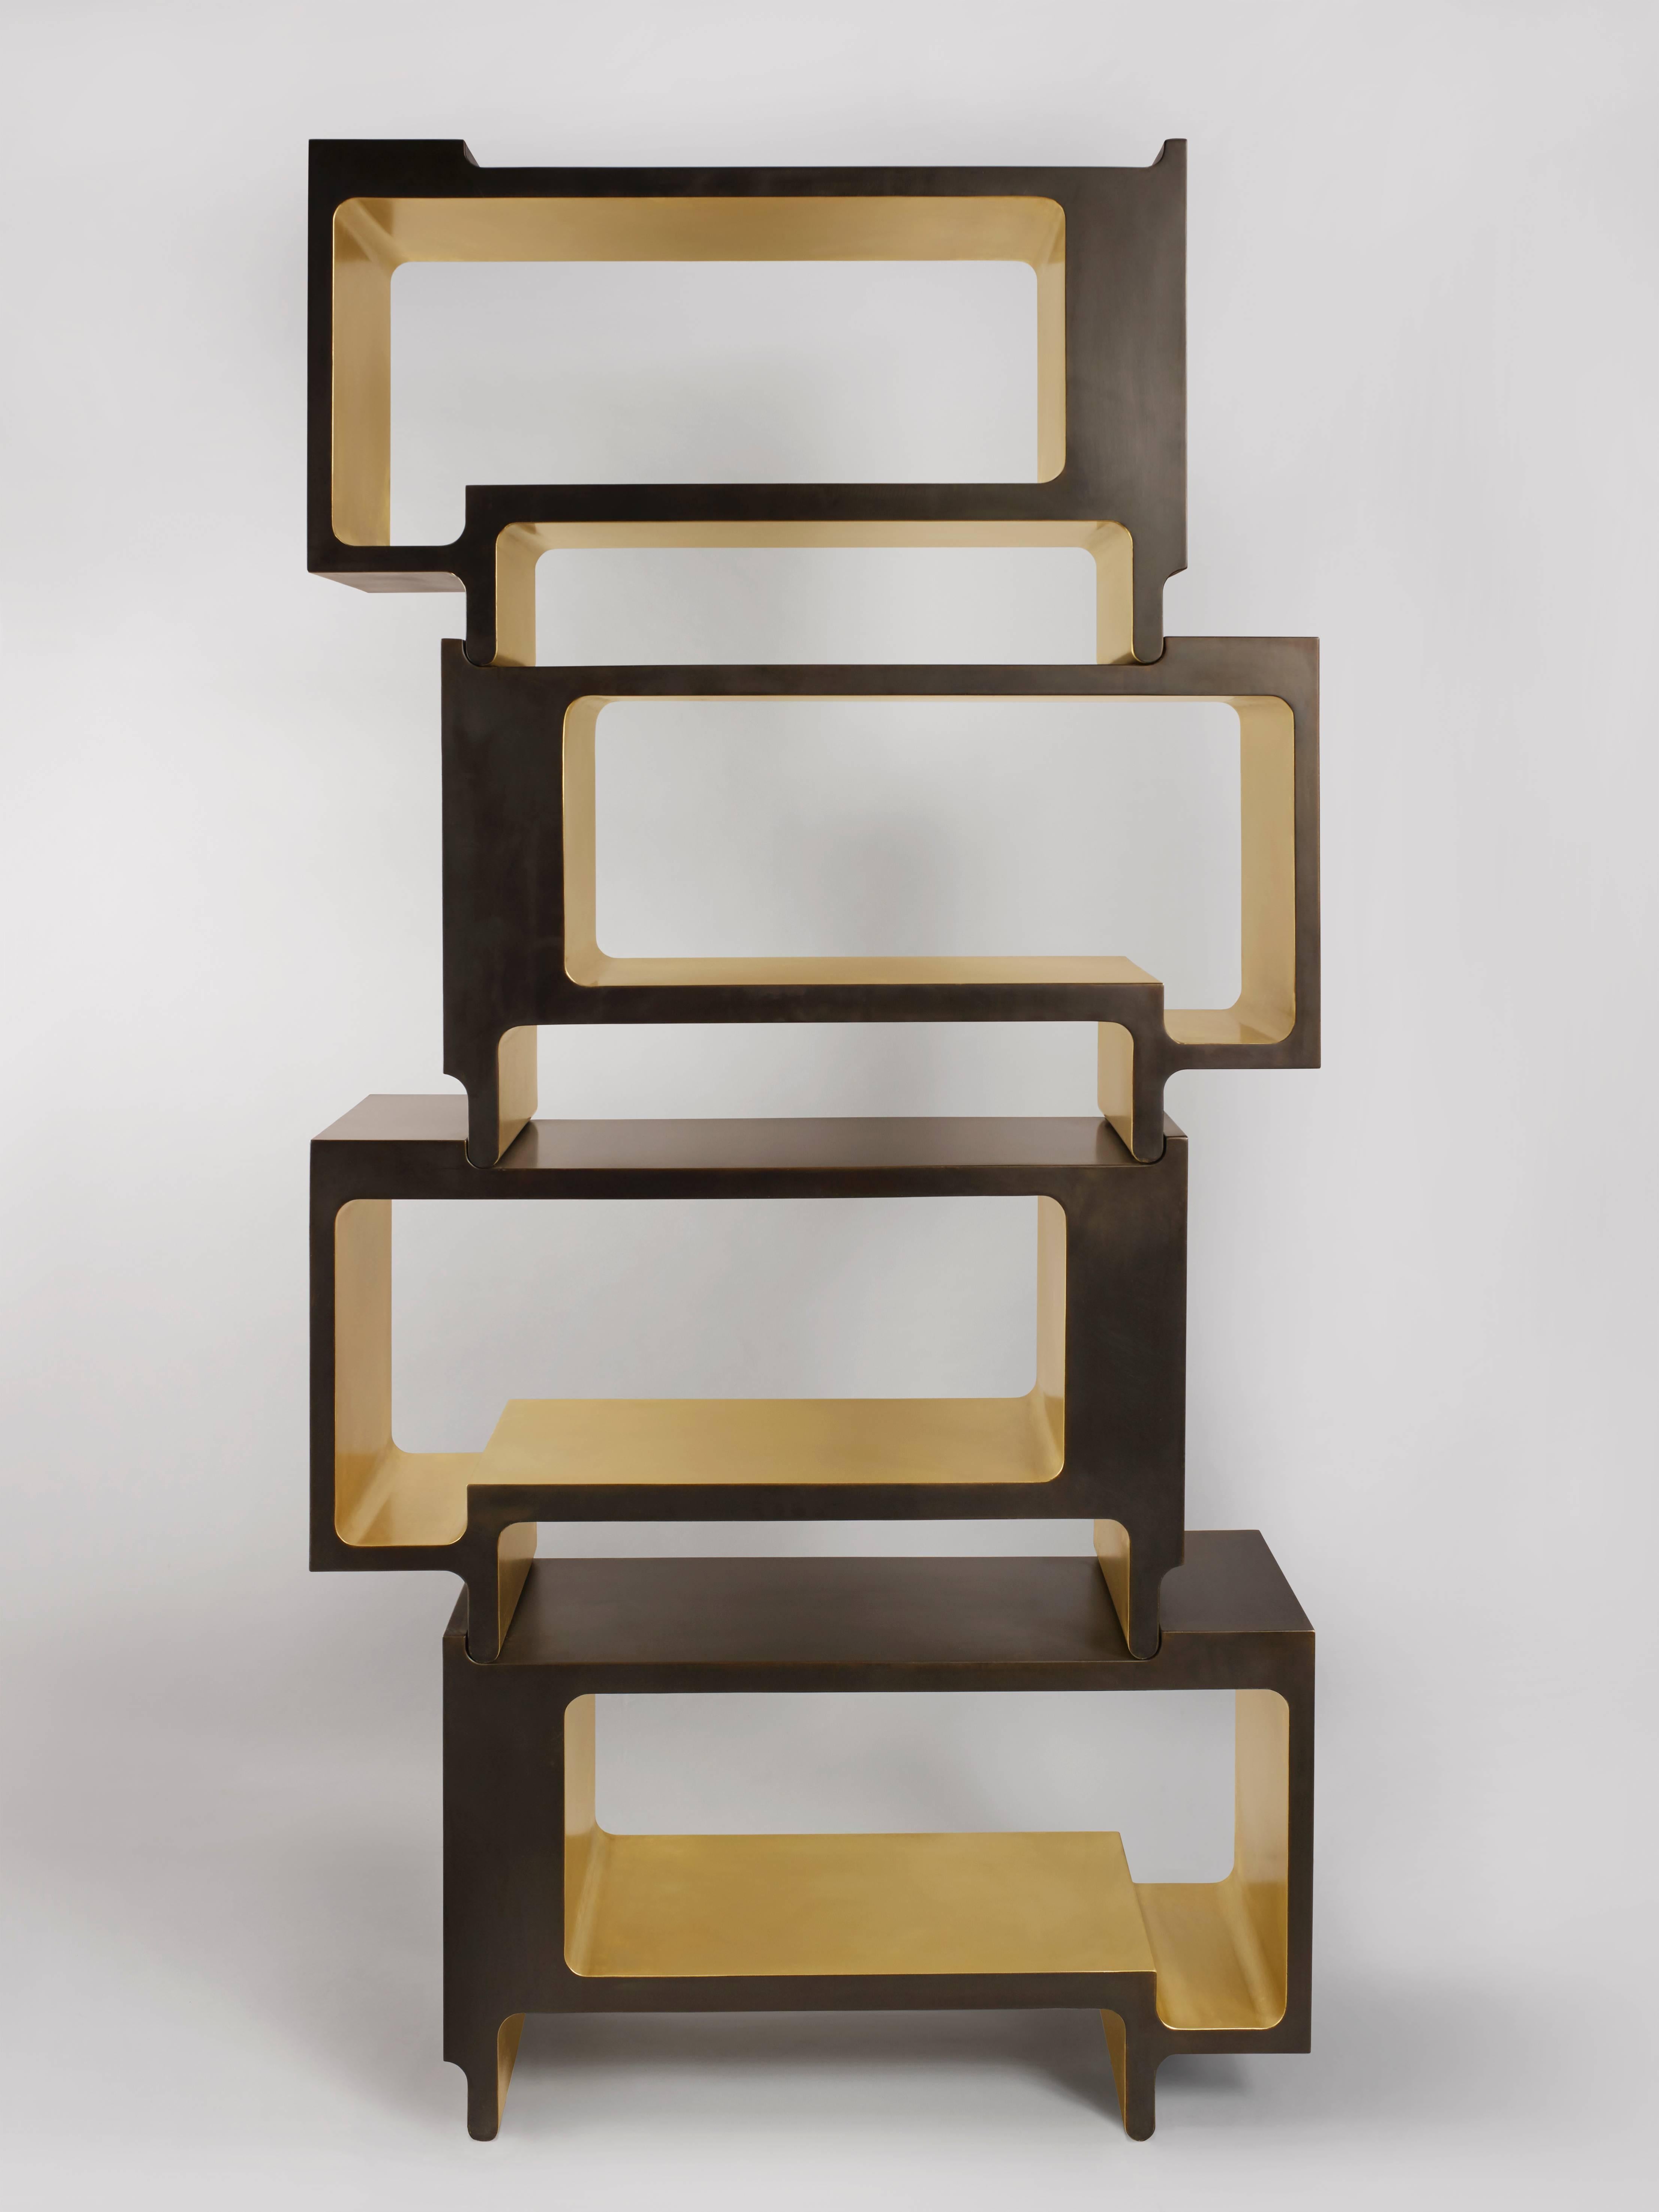 ‘XiangSheng II Shelving Unit‘ is an elegant collectible design work that combines champagne colored brushed bronze surfaces, and oxidized bronze with an intense brown patina. This limited edition bookcase includes four individual units. Units can be